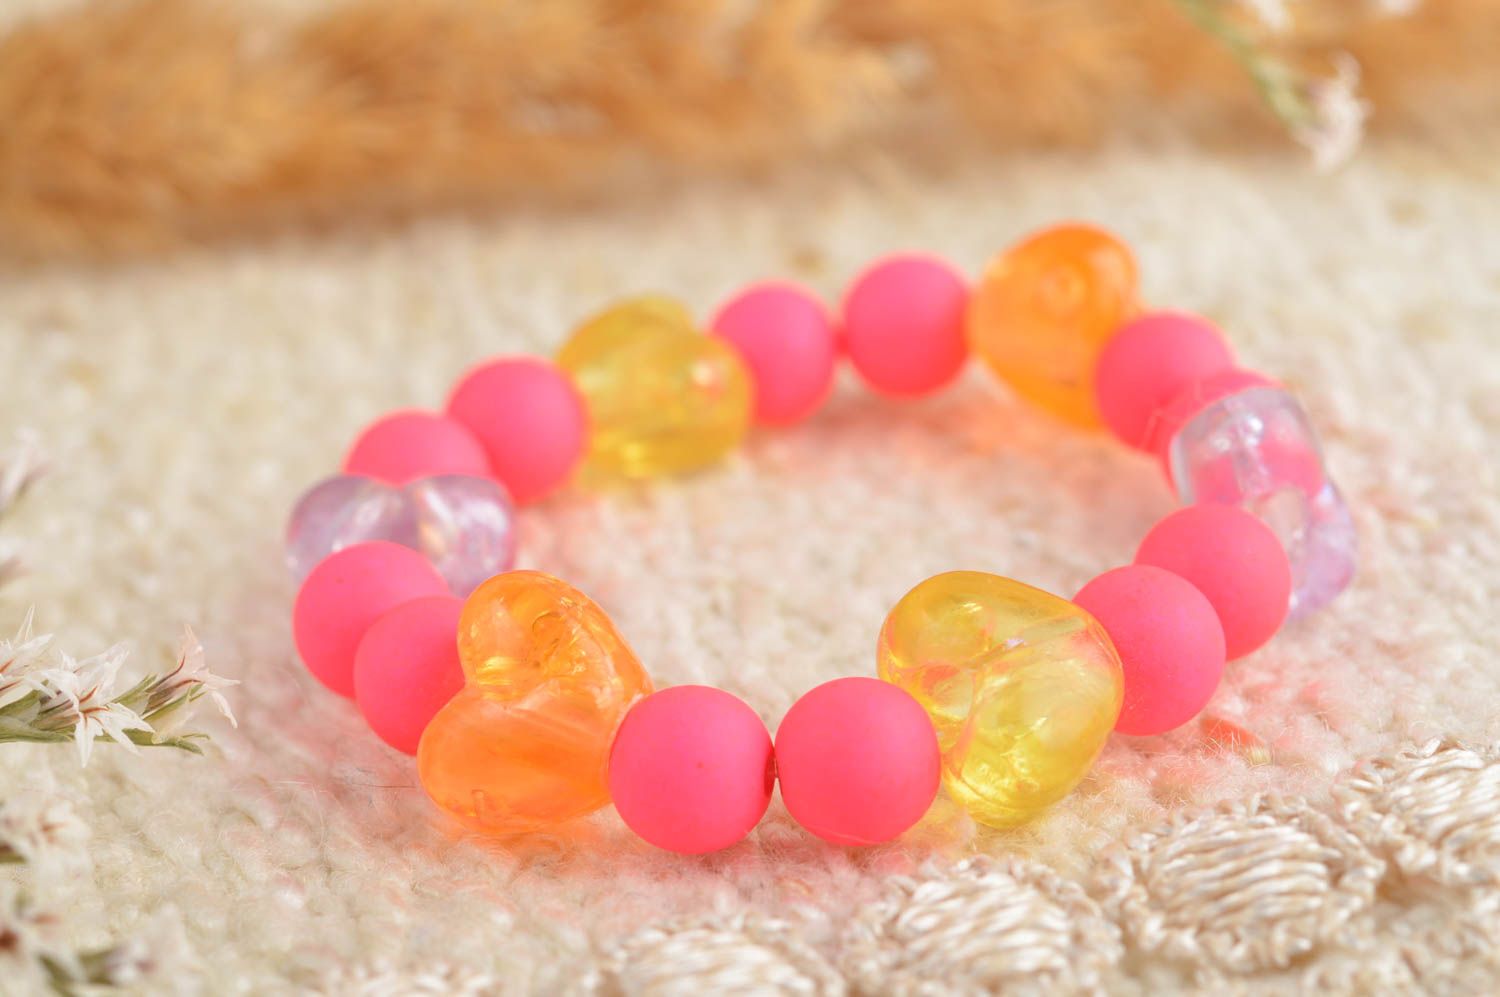 Buy PinkSheep Friend Bracelets for Kids, Crystal Beaded Bracelets, 10 PC,  Princess Charm Bracelet Online at Low Prices in India - Amazon.in